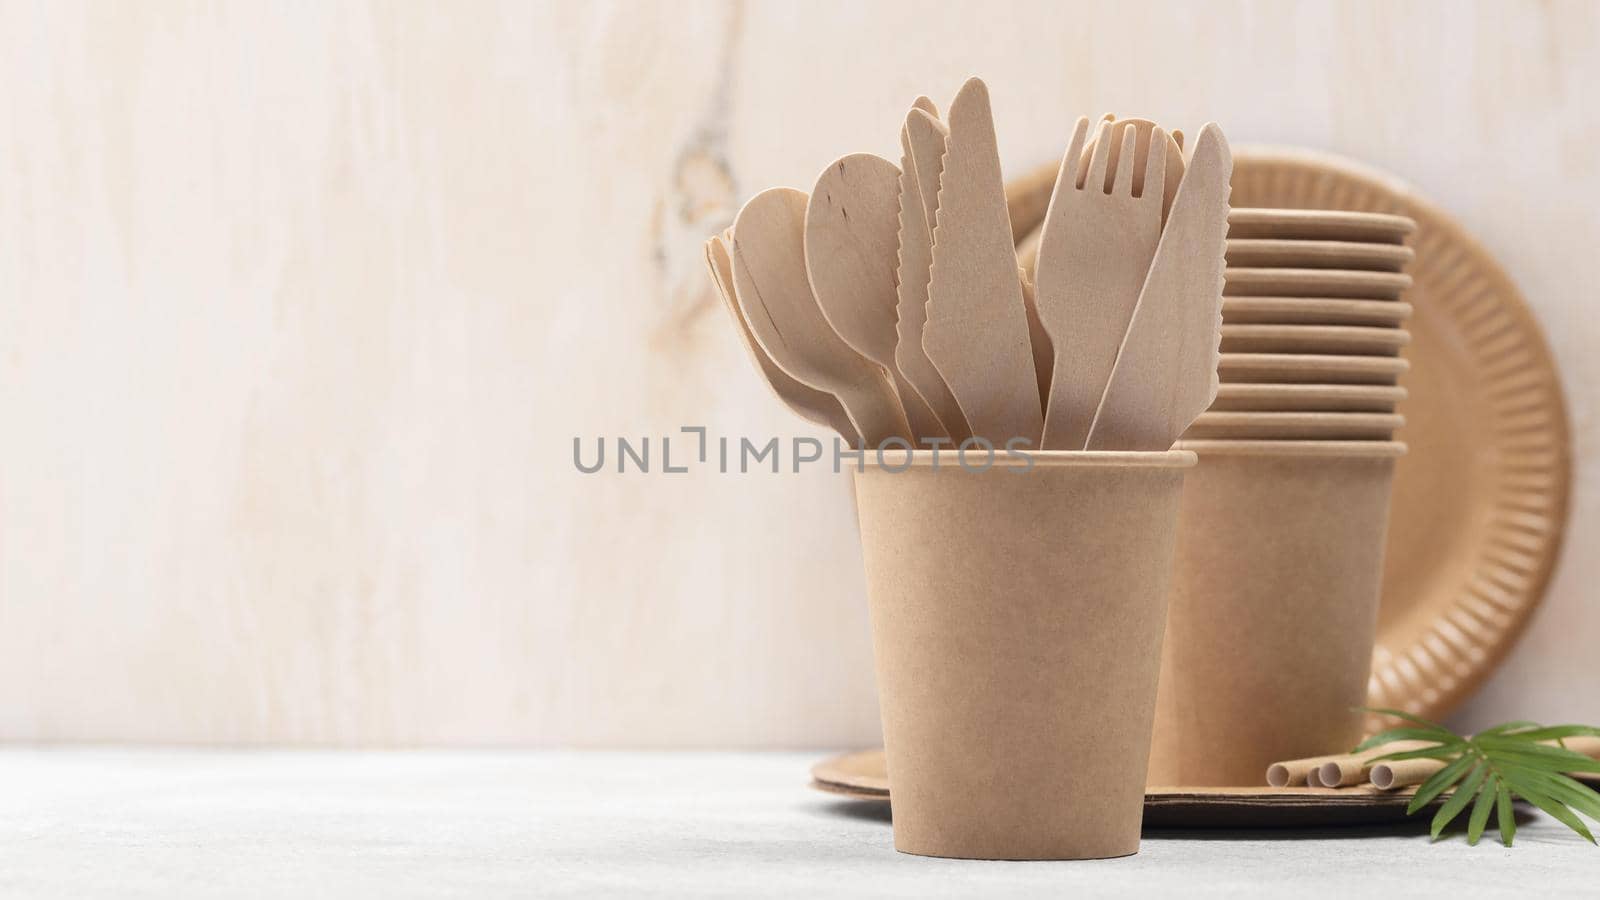 eco friendly disposable tableware cardboard front view. High quality beautiful photo concept by Zahard